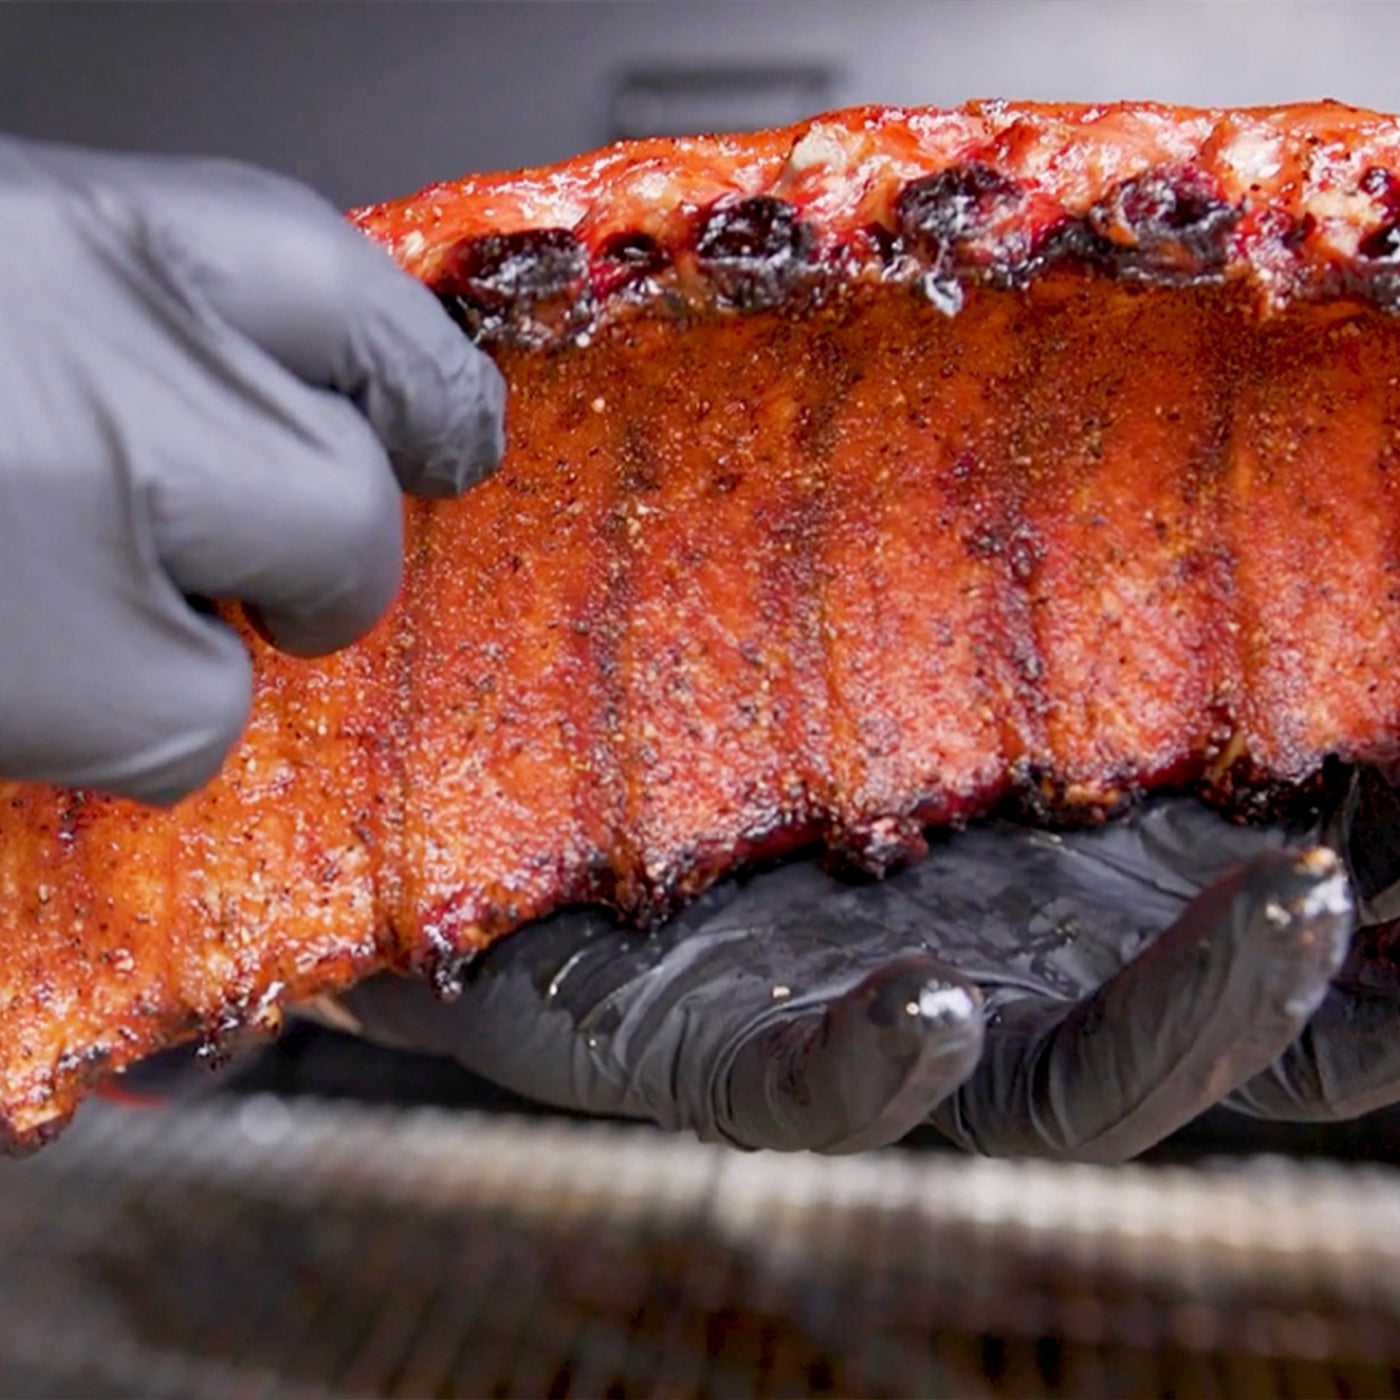 How to cook ribs